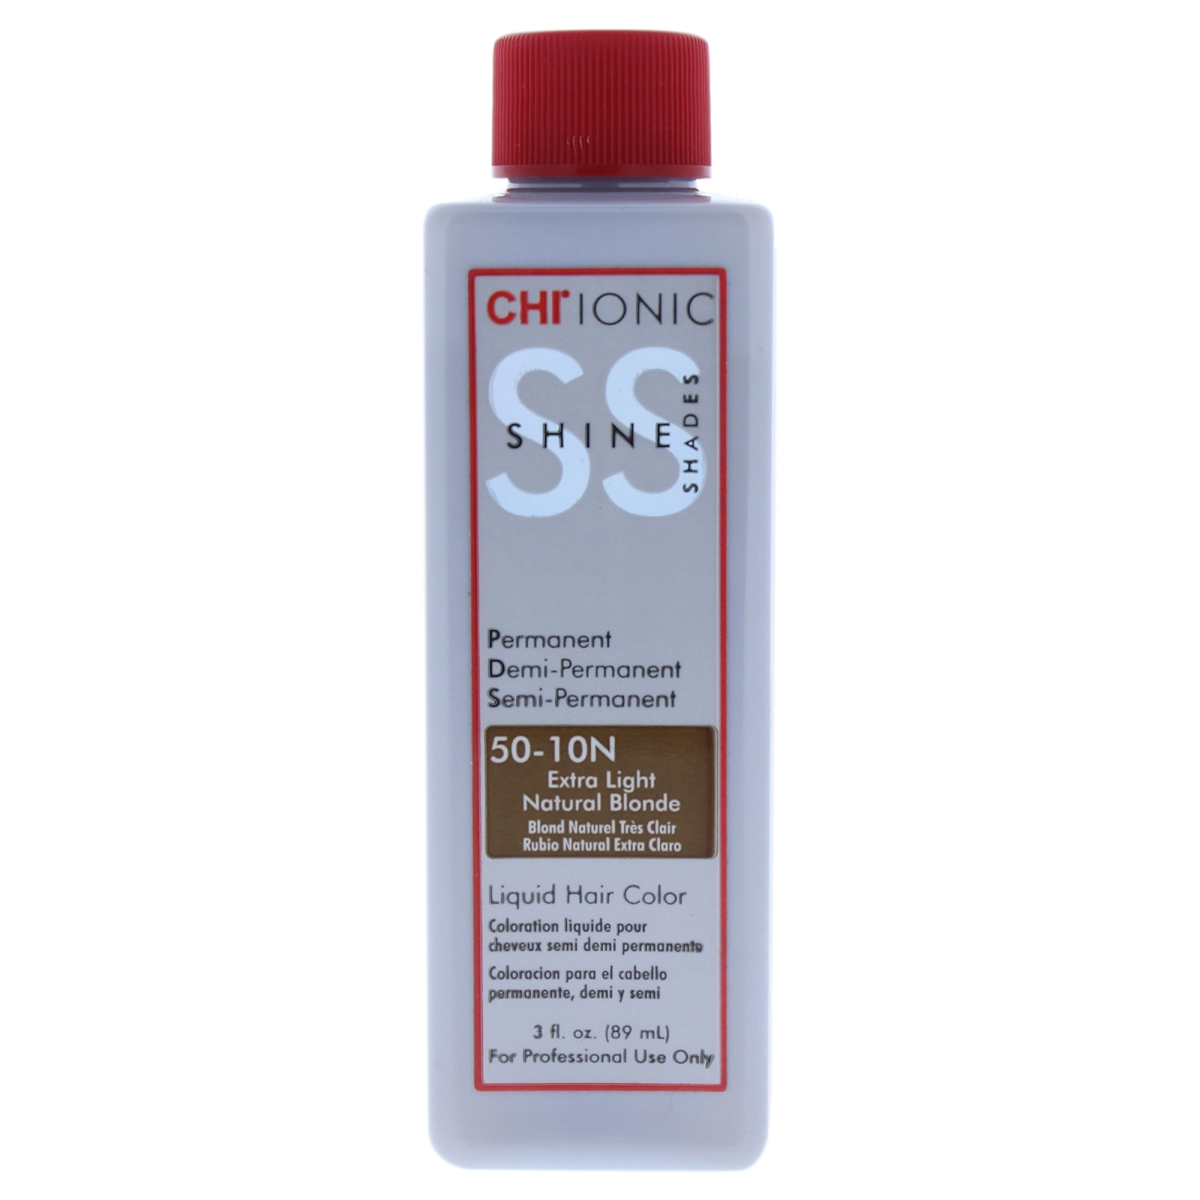 I0084015 Ionic Shine Shades Liquid Hair Color For Unisex - 50-10n Extra Light Natural Blonde - 3 Oz